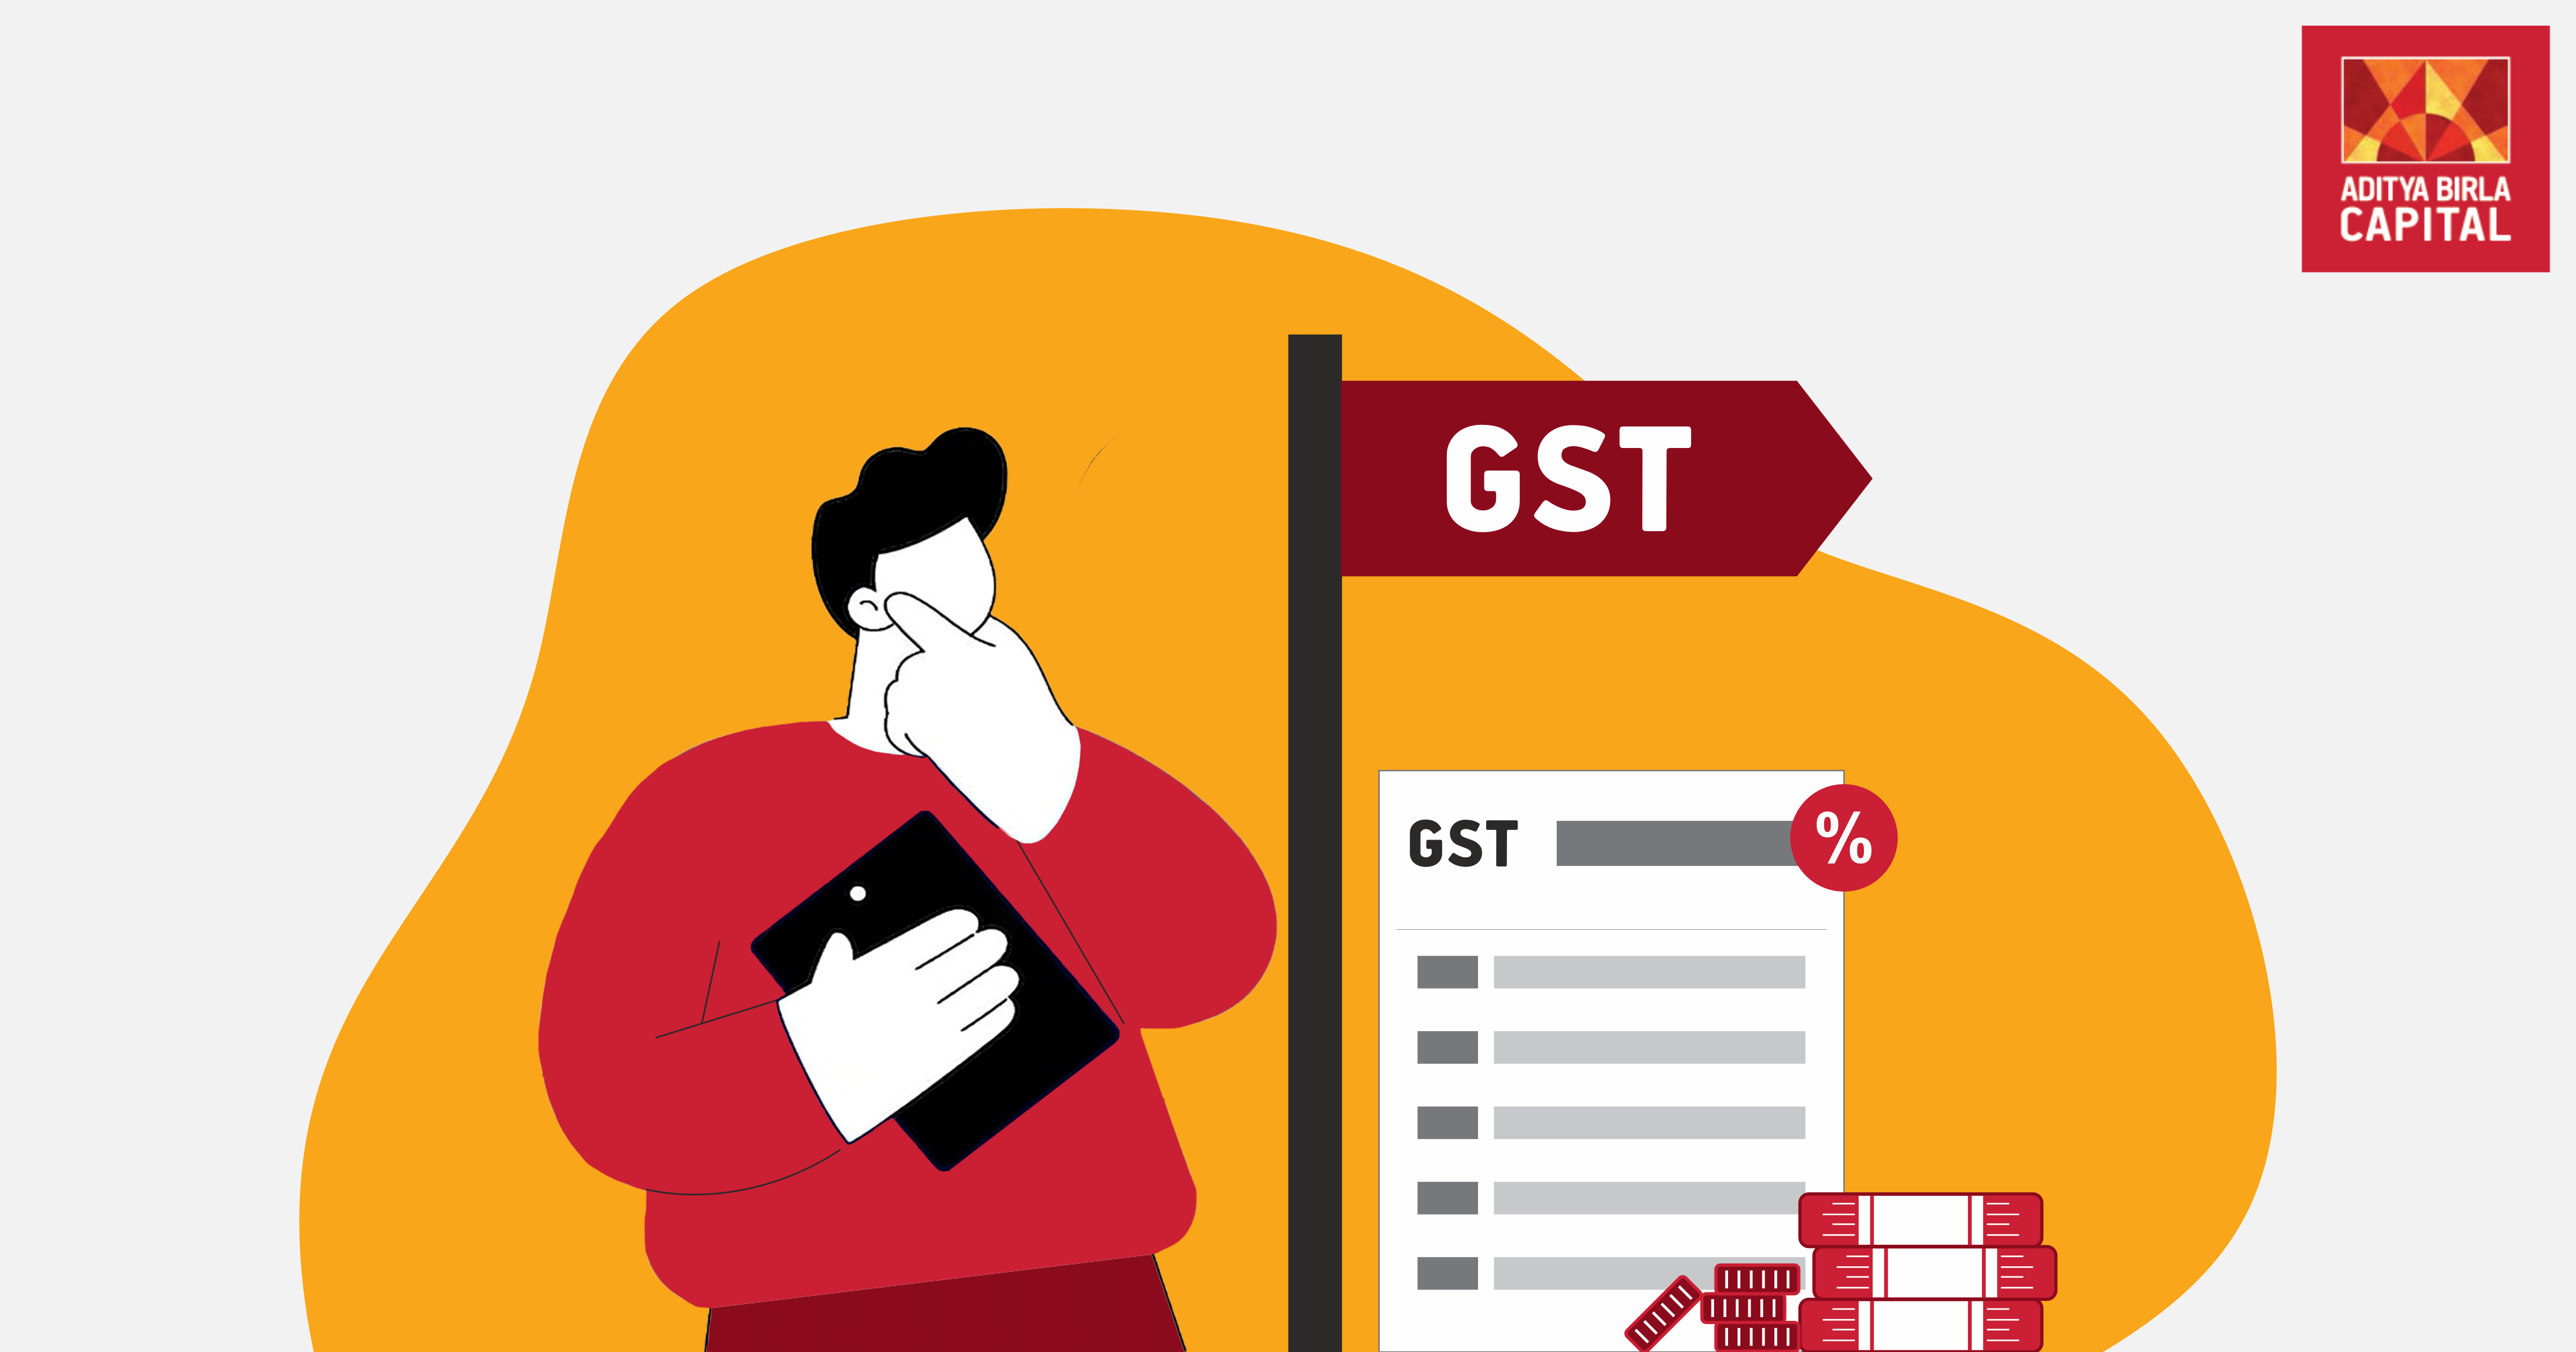 A guide to Navigate the GST Portal